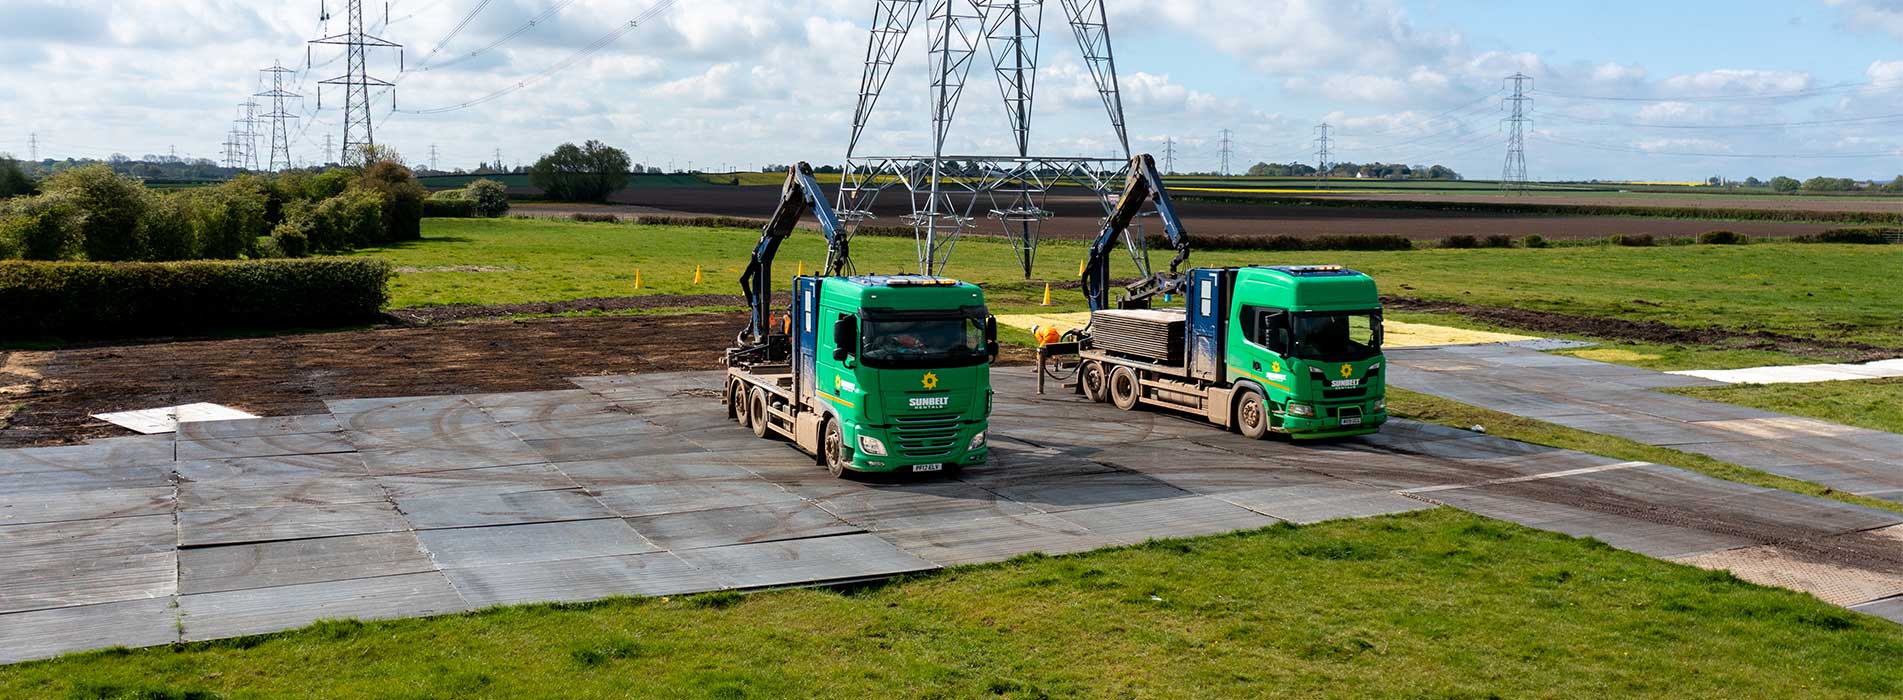 Two Trakway Trucks Laying Down Temporary Trakway On A Field